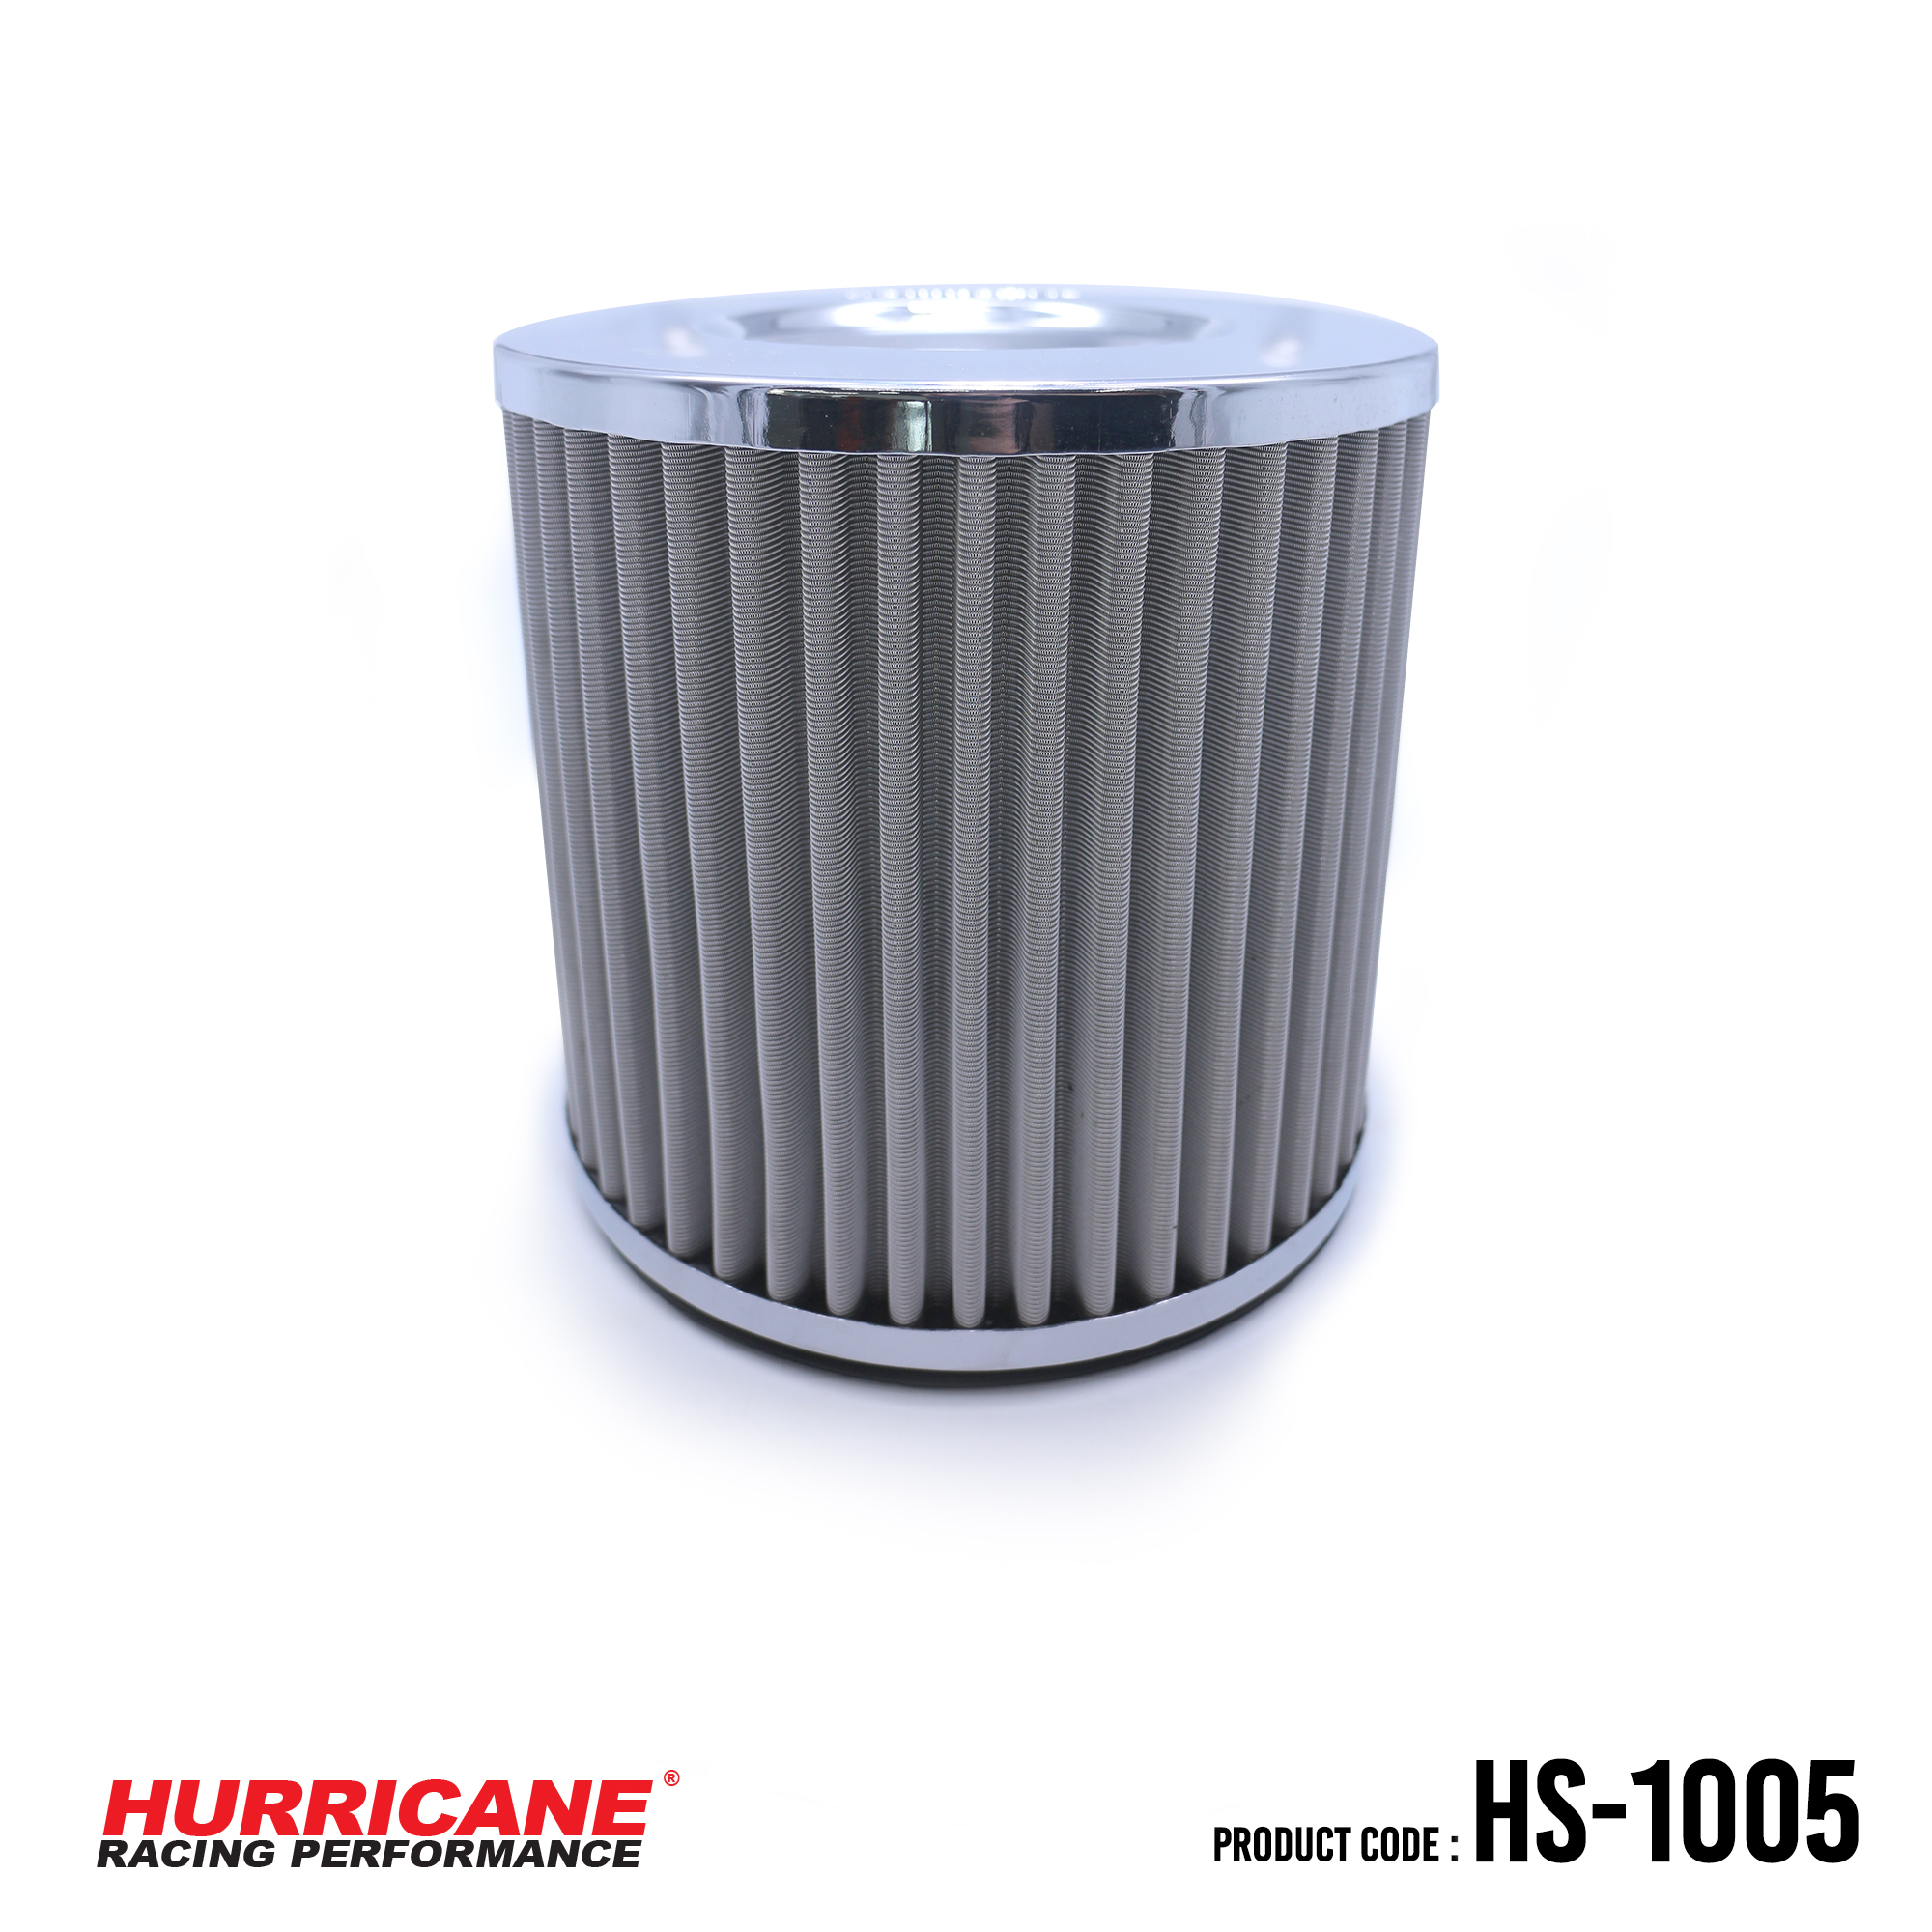 HURRICANE STAINLESS STEEL AIR FILTER FOR HS-1005 Mitsubishi